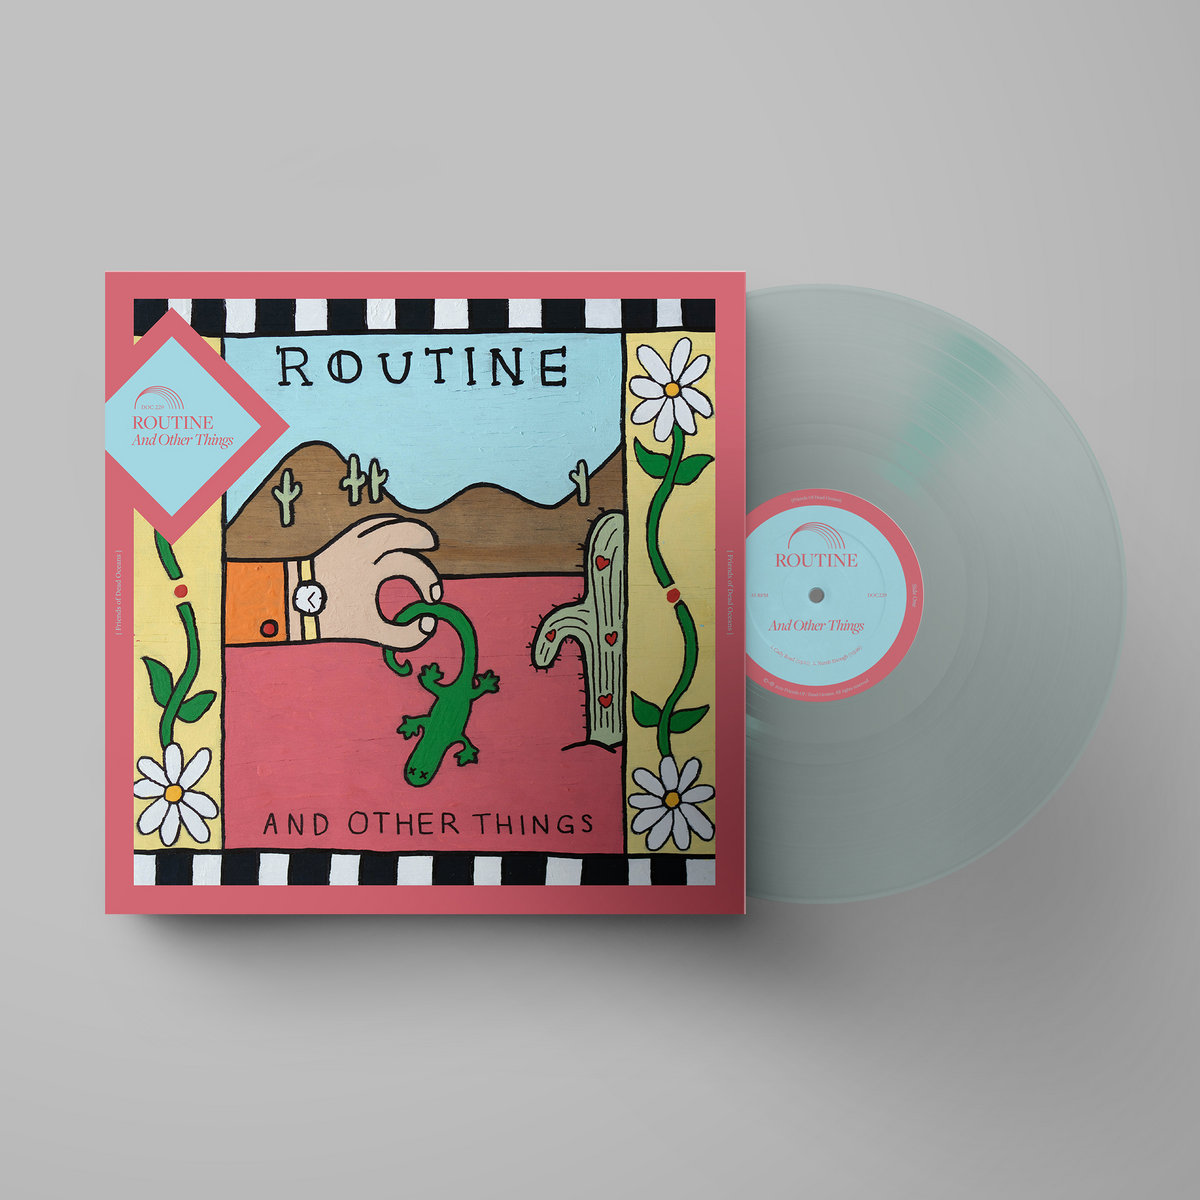 Routine "And Other Things" EP